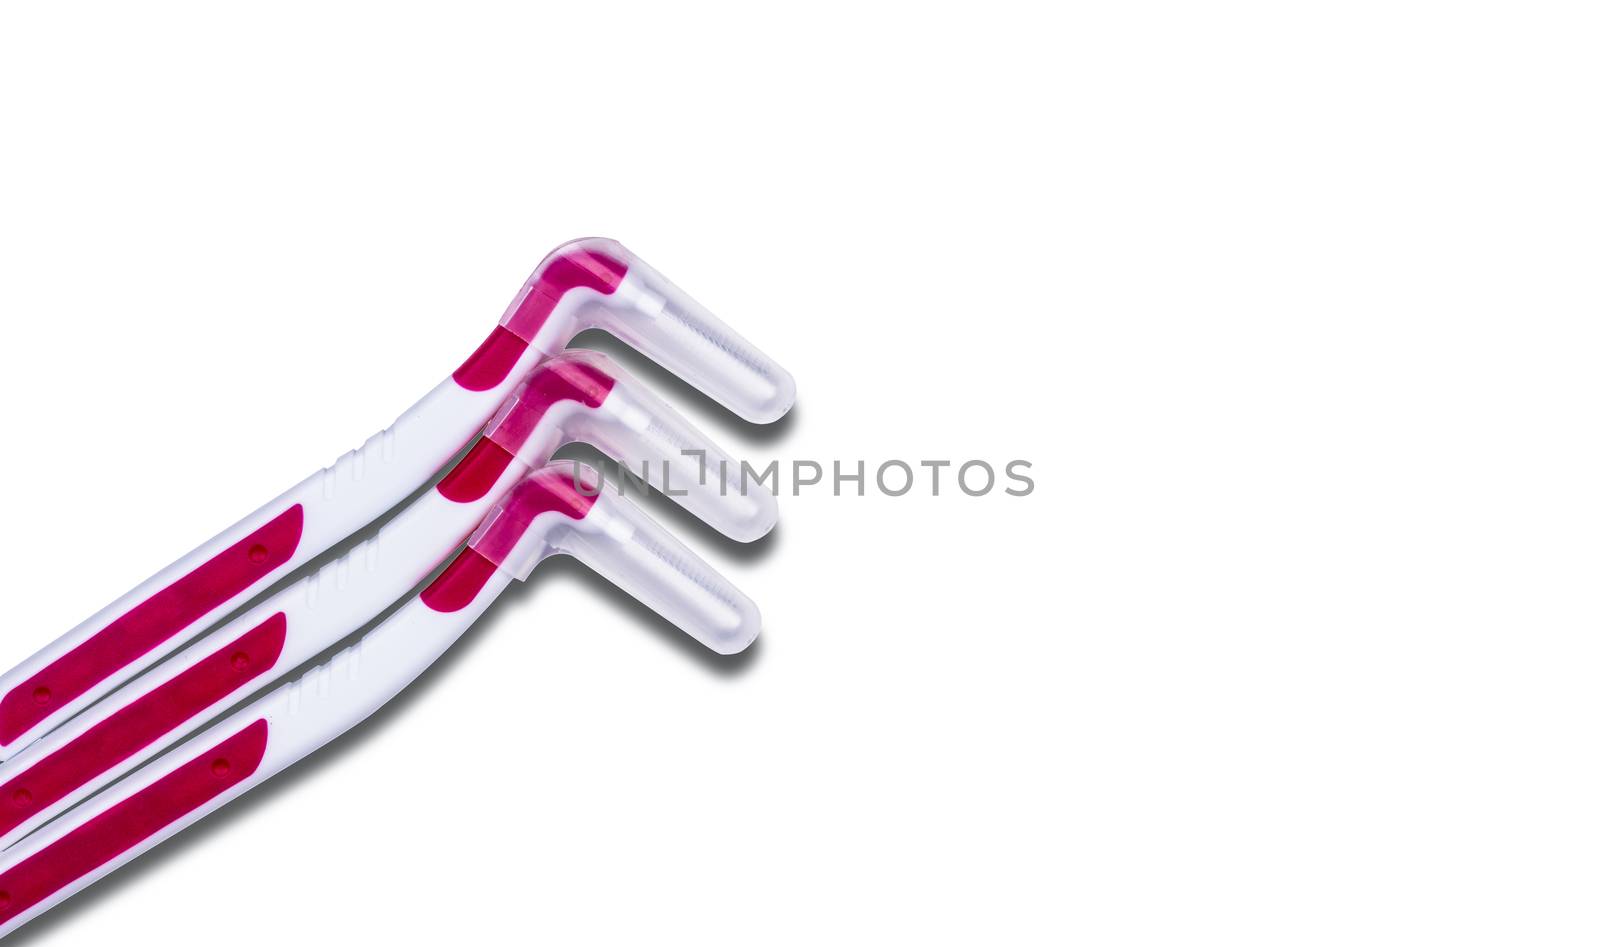 Three interdental brush with cover isolated on white background with copy space for text. Dental care concept. Equipment for get rid of food stuck in teeth